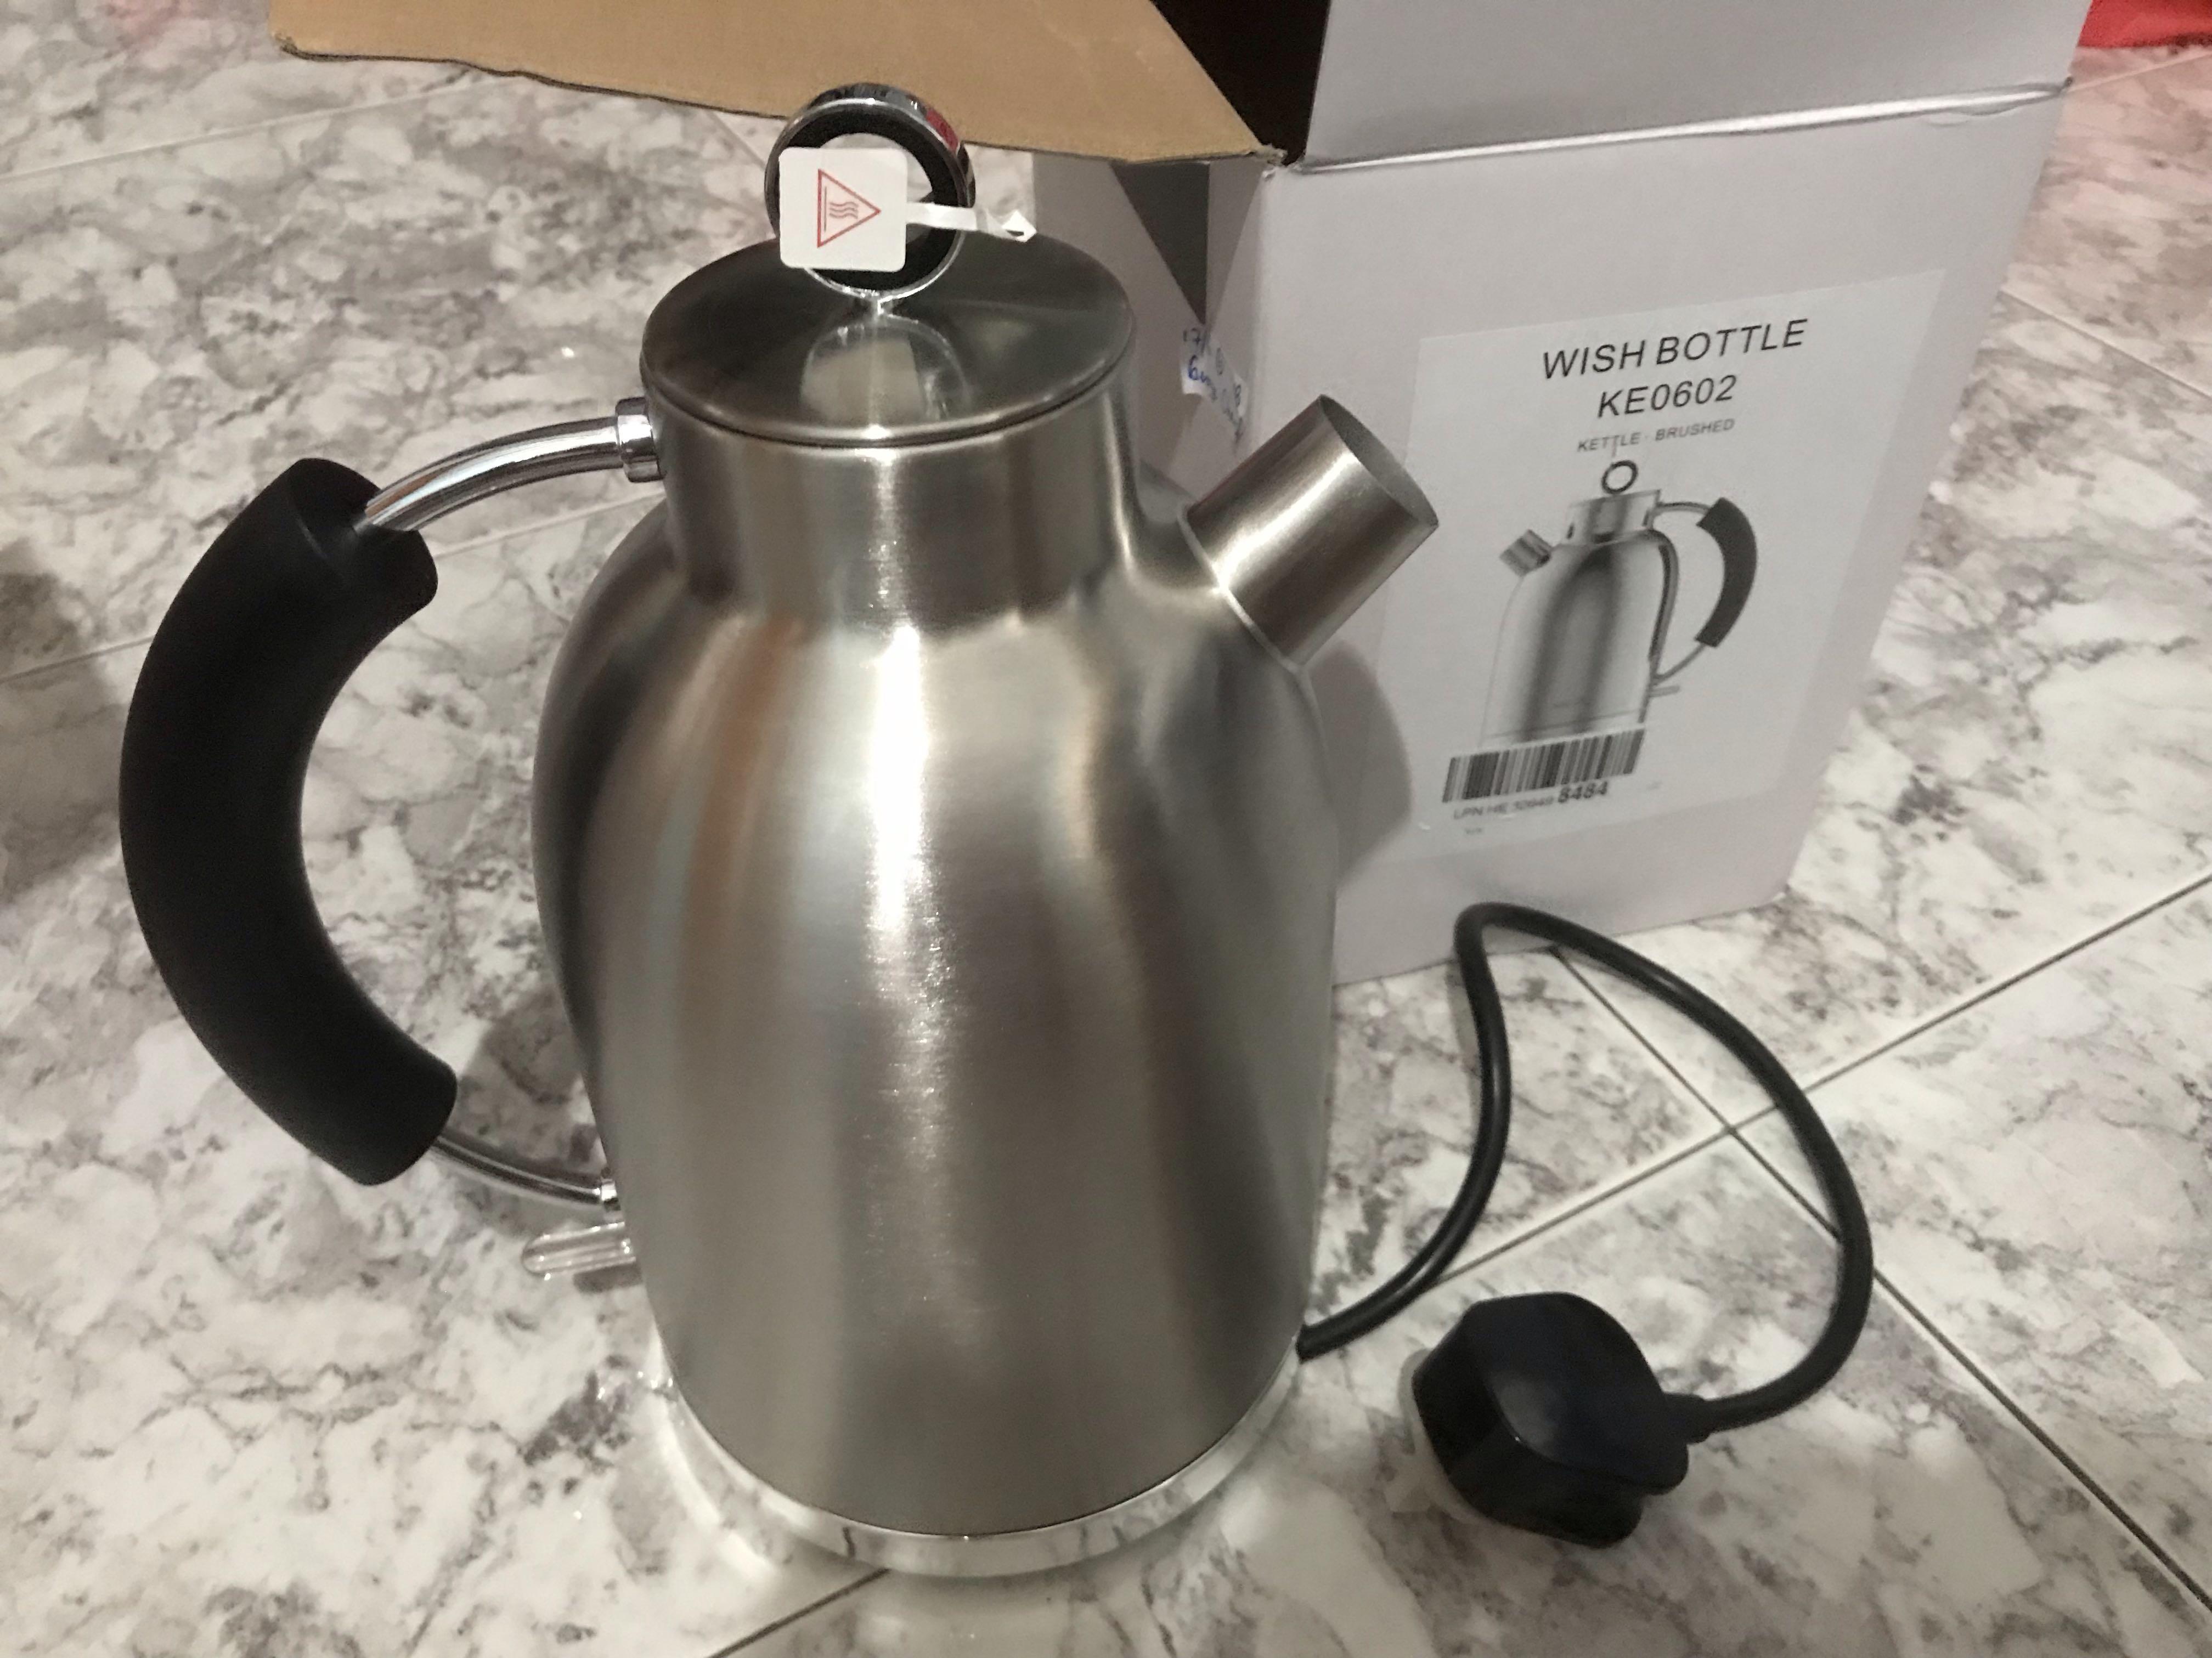 Electric Kettle, ASCOT Stainless Steel Electric Tea Kettle, 1.7QT, 1500W